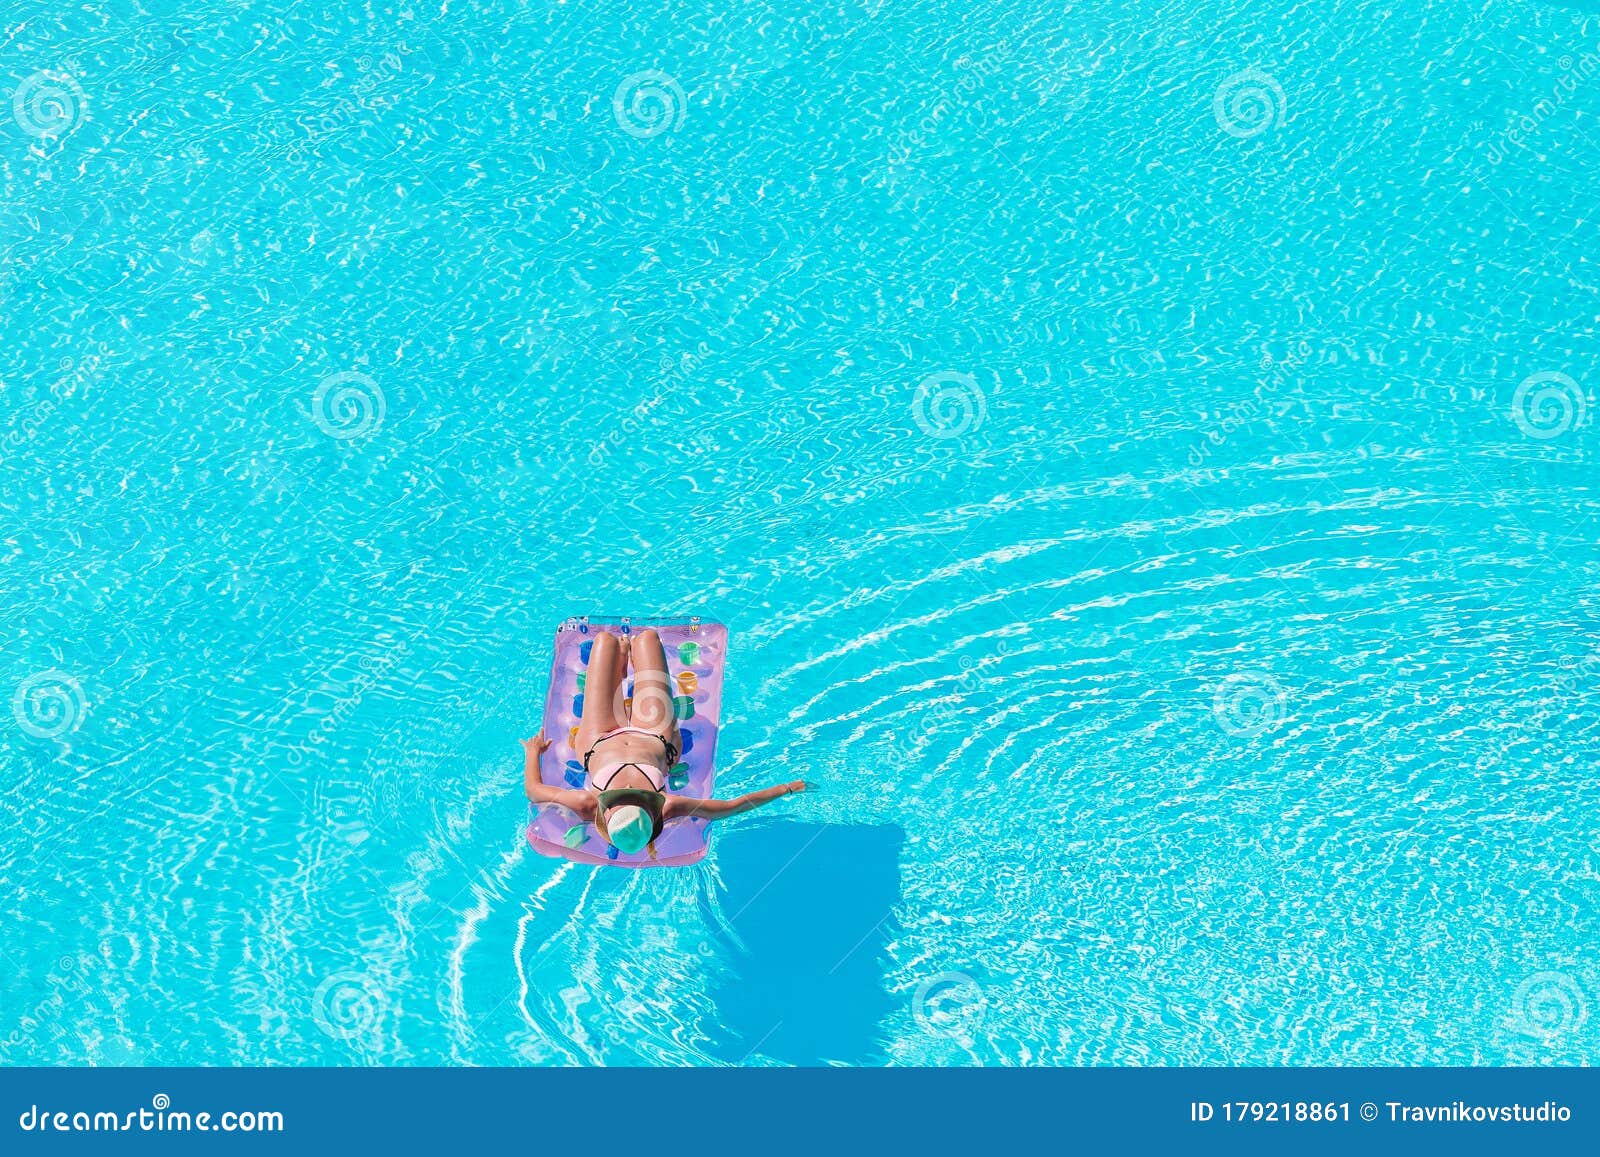 Beautiful Young Woman Relaxing in Swimming Pool. Stock Image - Image of ...